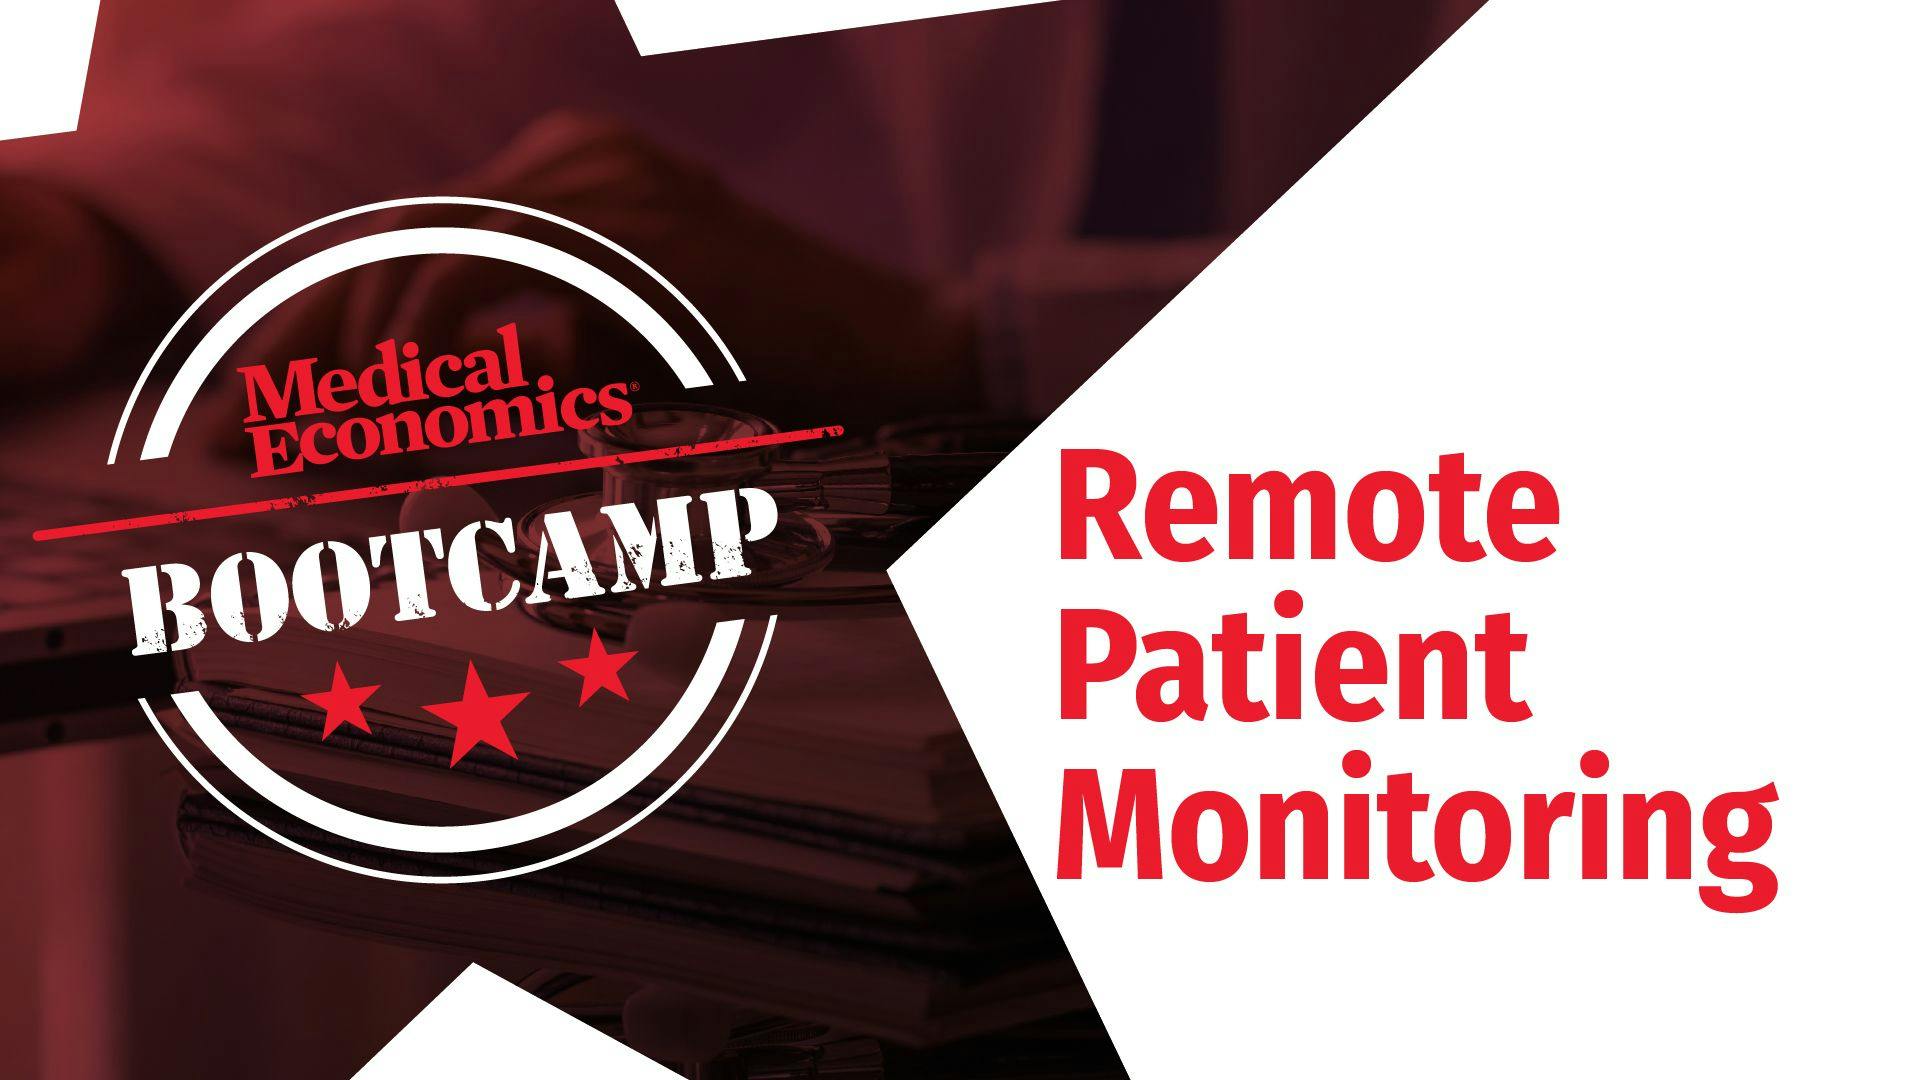 Is remote patient monitoring right for your practice?